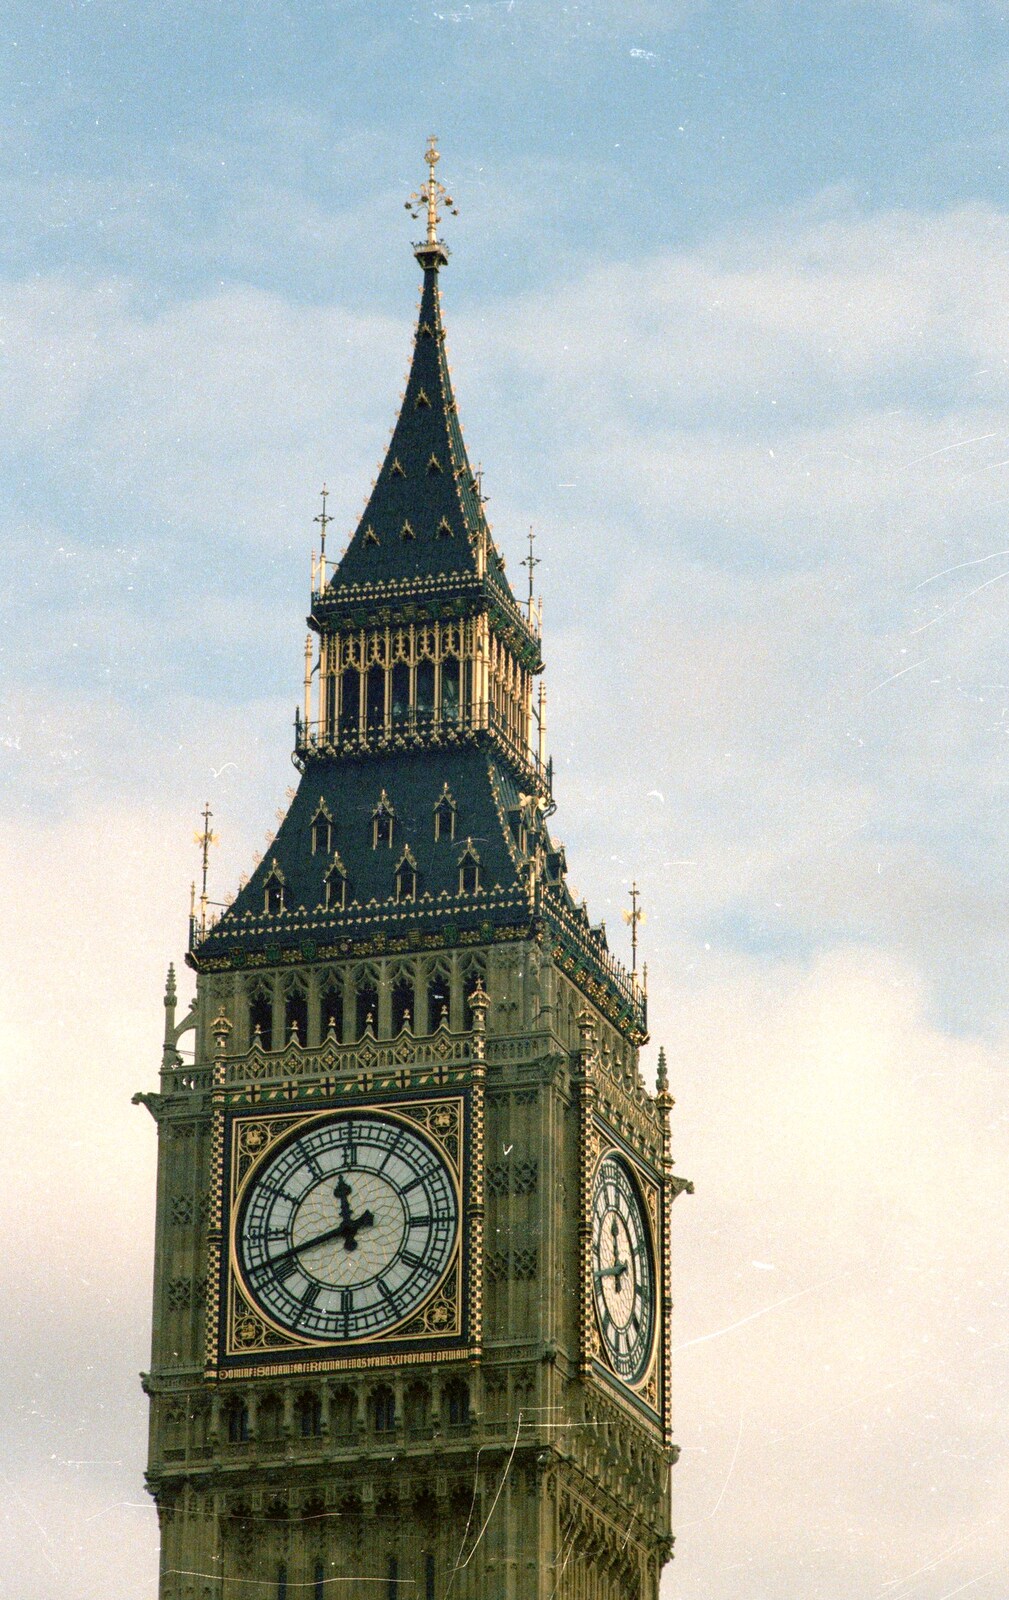 The clock tower of the Houses of Parliament from Grape Picking and the Trip Back to Poly, Bransgore and London - 20th September 1986